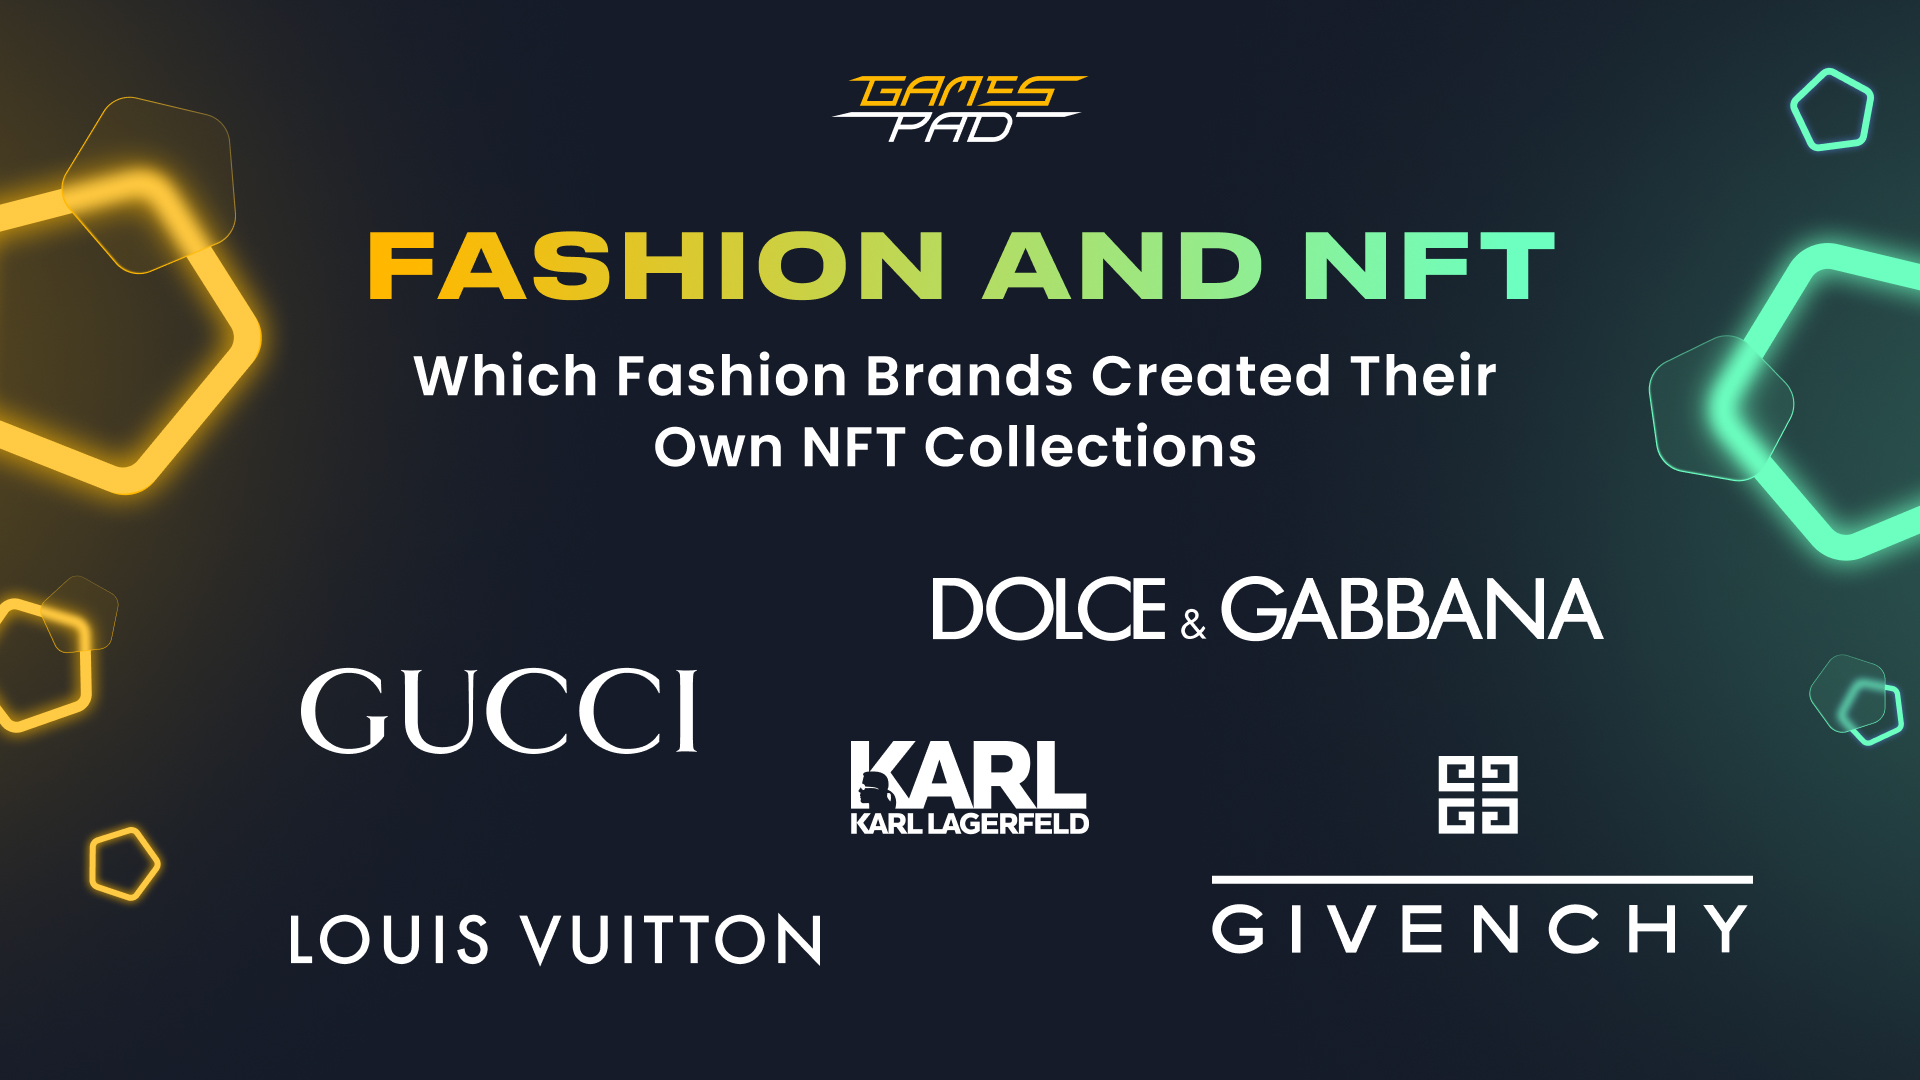 Fashion And NFT. Which Fashion Brands Created Their Own NFT Collections